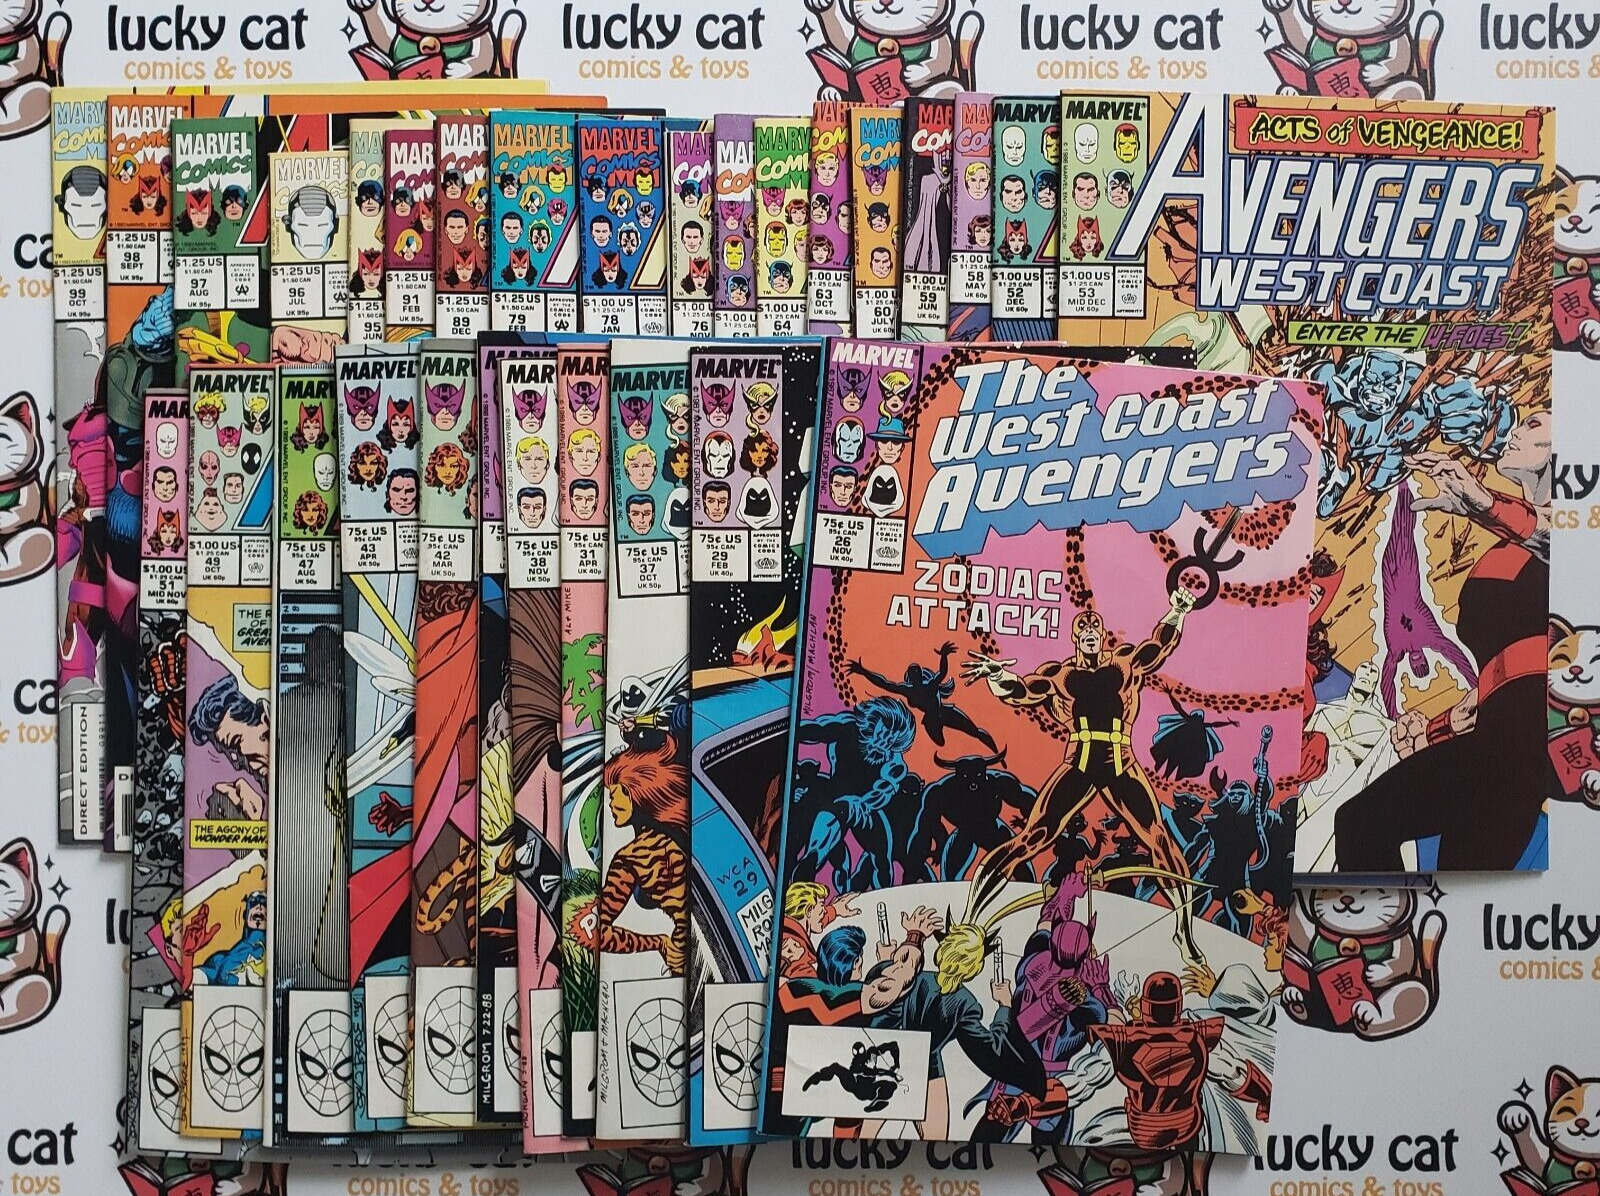 AVENGERS WEST COAST #26-99 LOT of 30 Issues Iron Man War Machine Vision